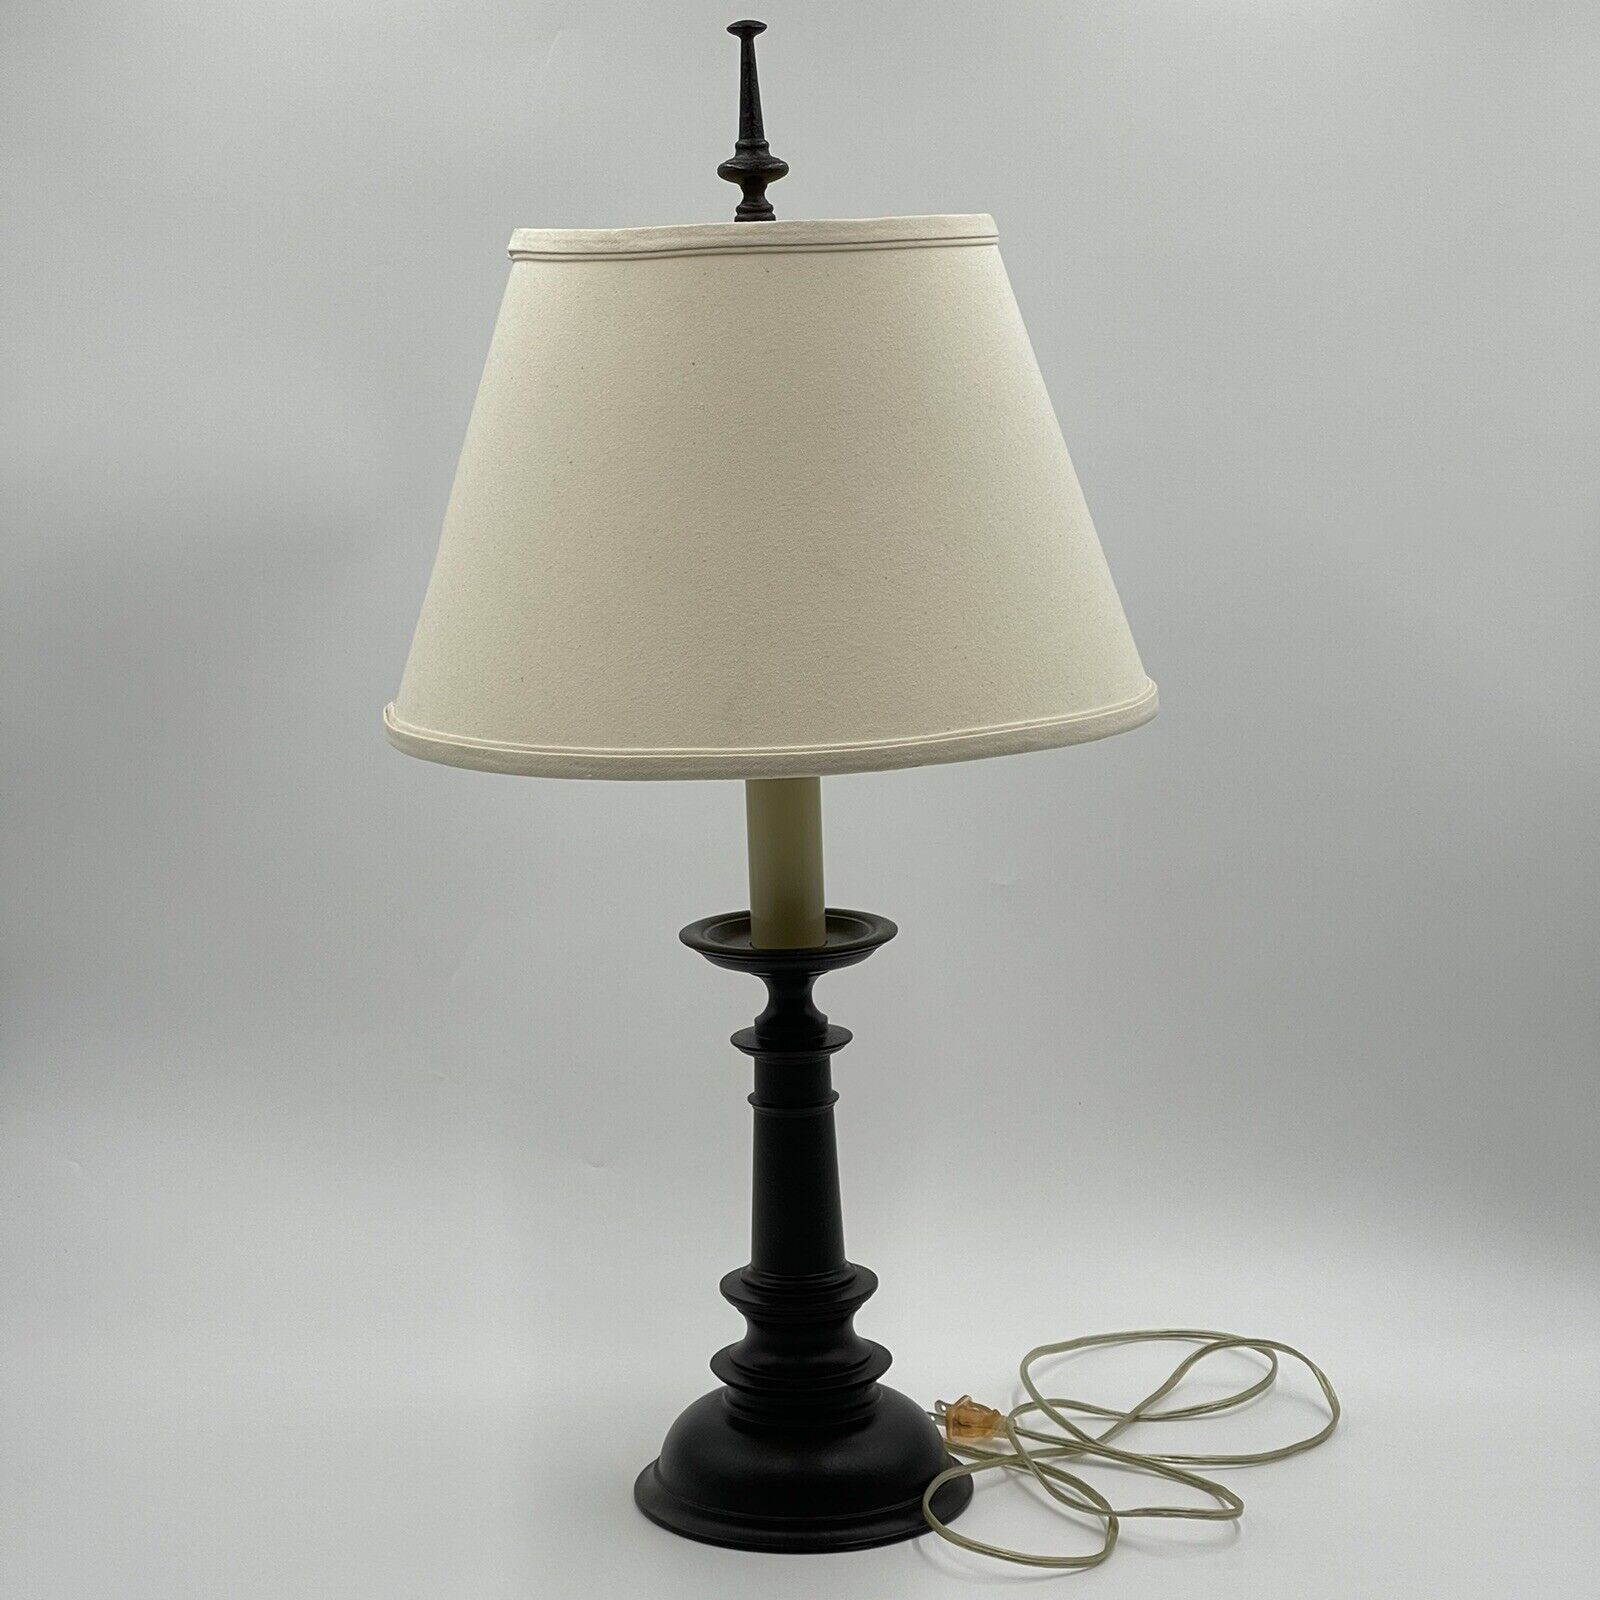 Stiffel Modern Table Lamp with Shade Black 30” Tall